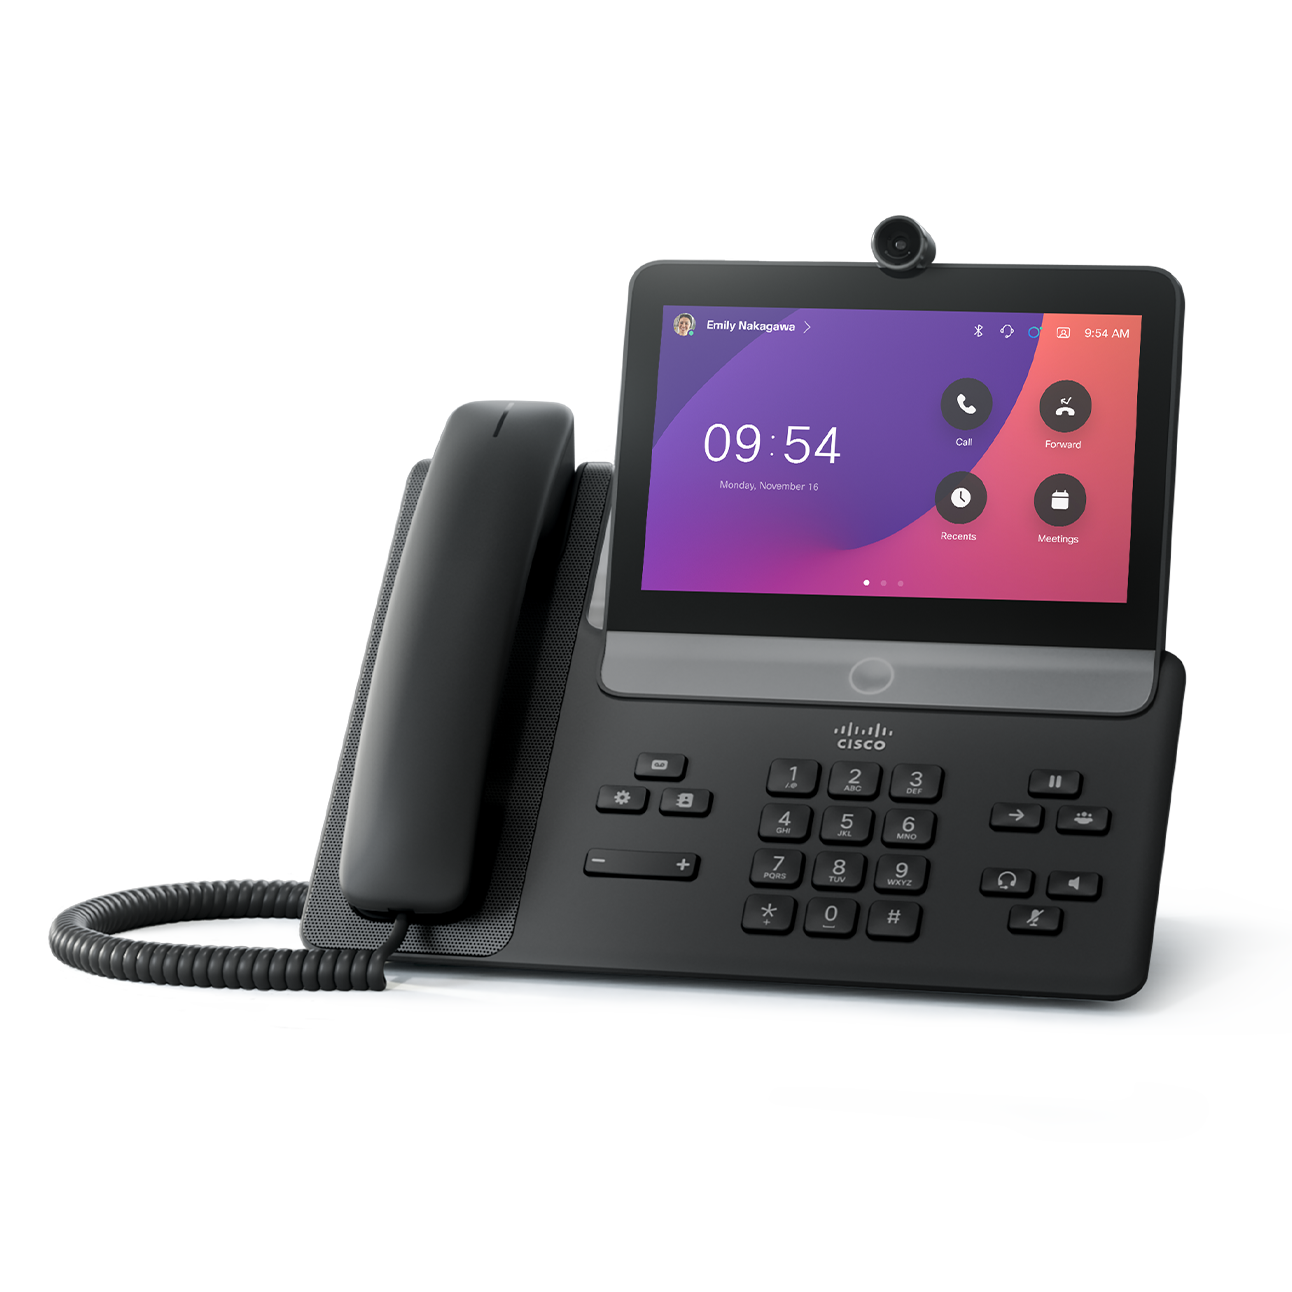 Cisco Video Phone 8875, with camera, handset, and touchscreen. Screen shows time of 9:54 and apps like Meetings and Call.